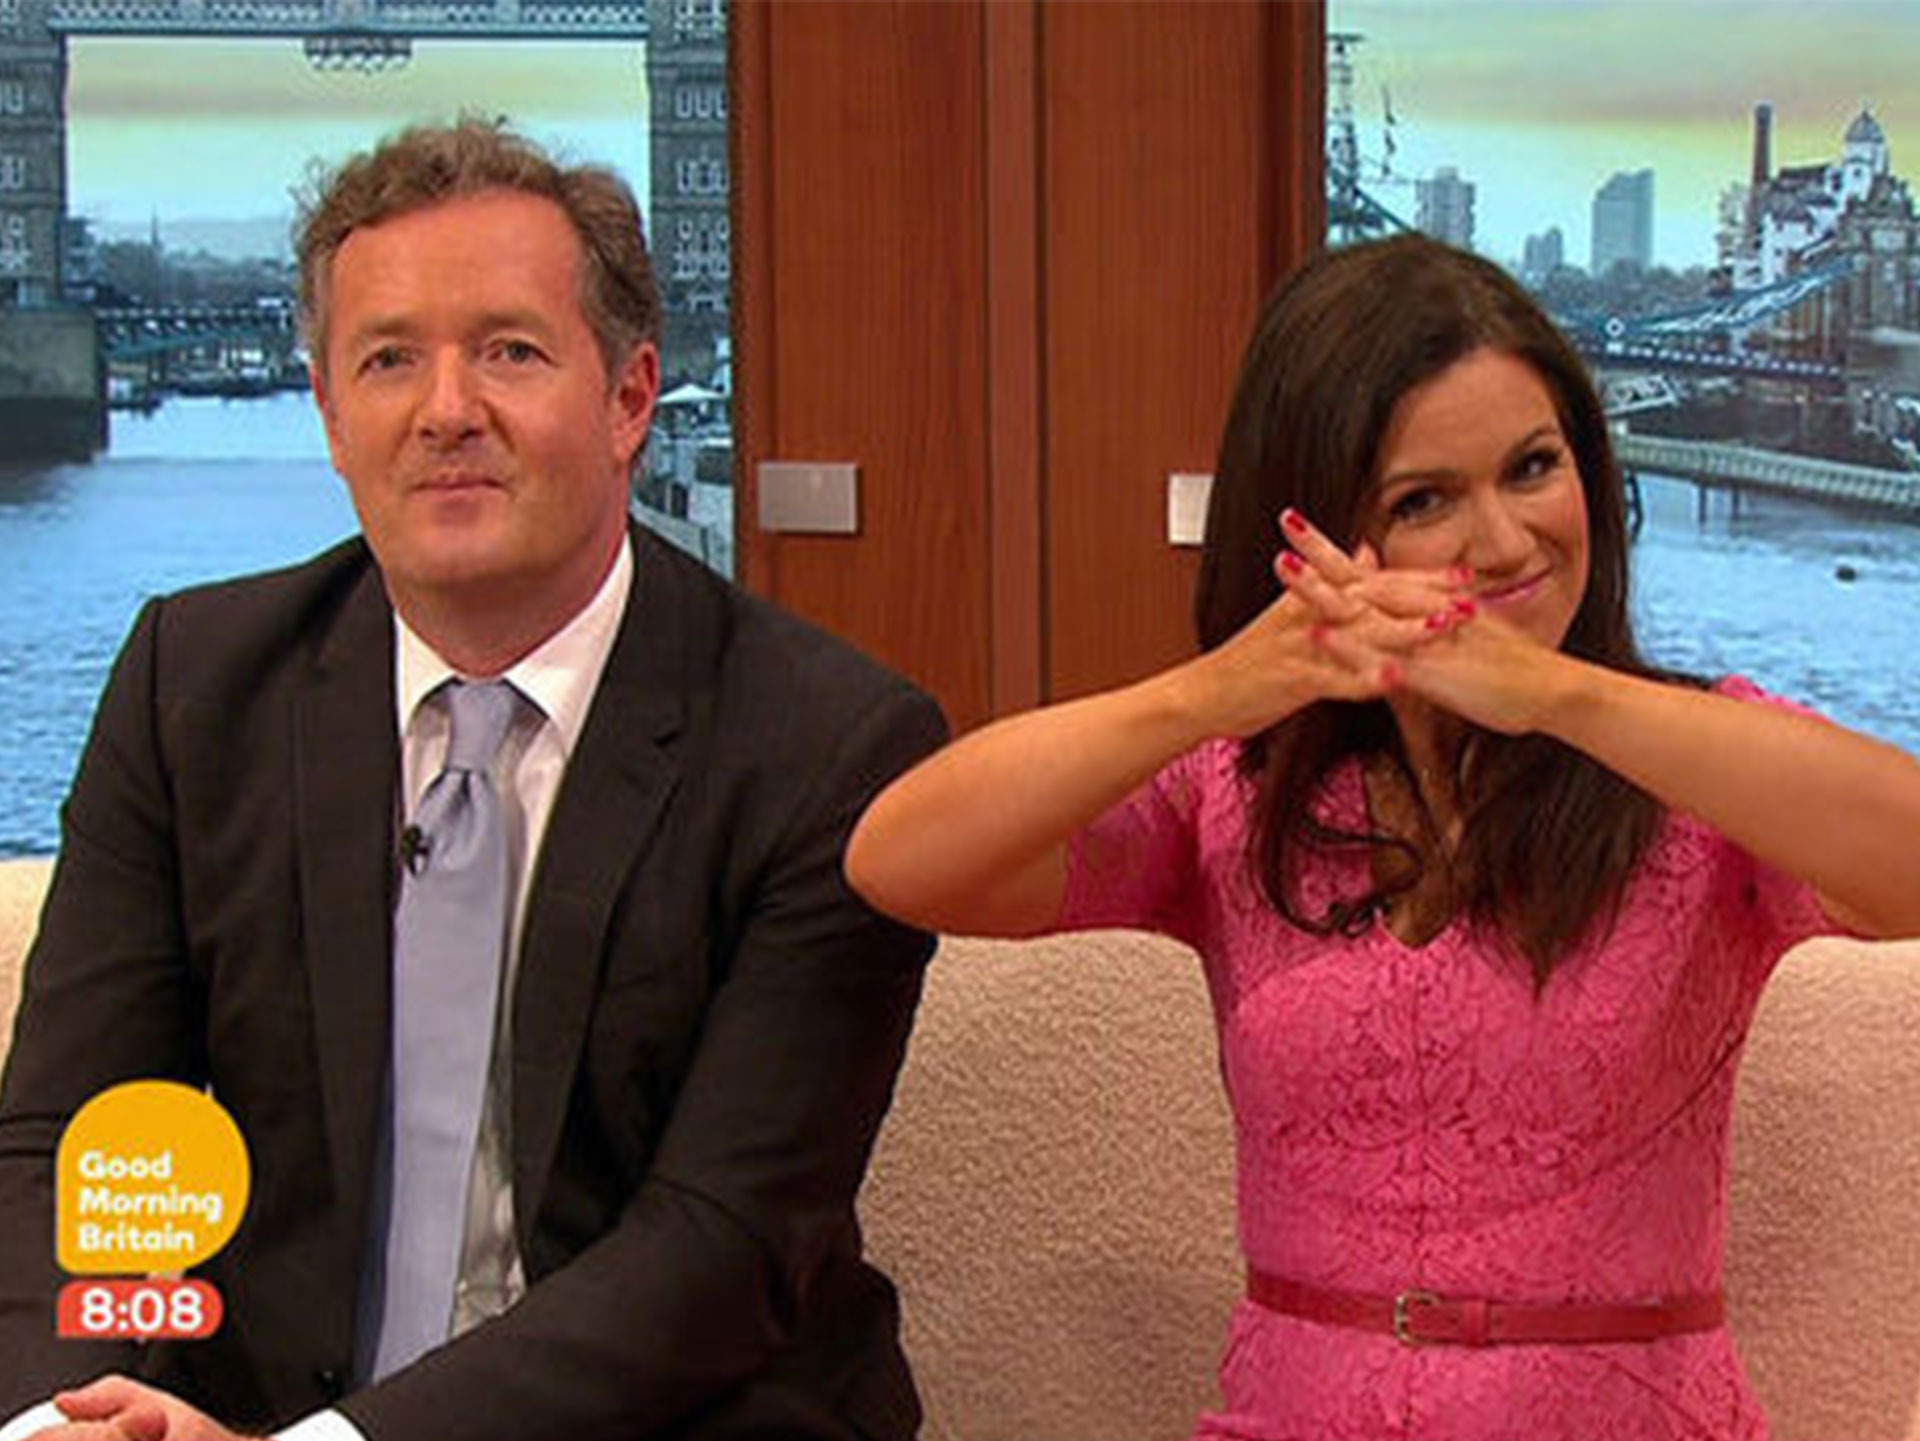 Grab the popcorn: Piers Morgan slammed by his co-host in awkward morning show exchange